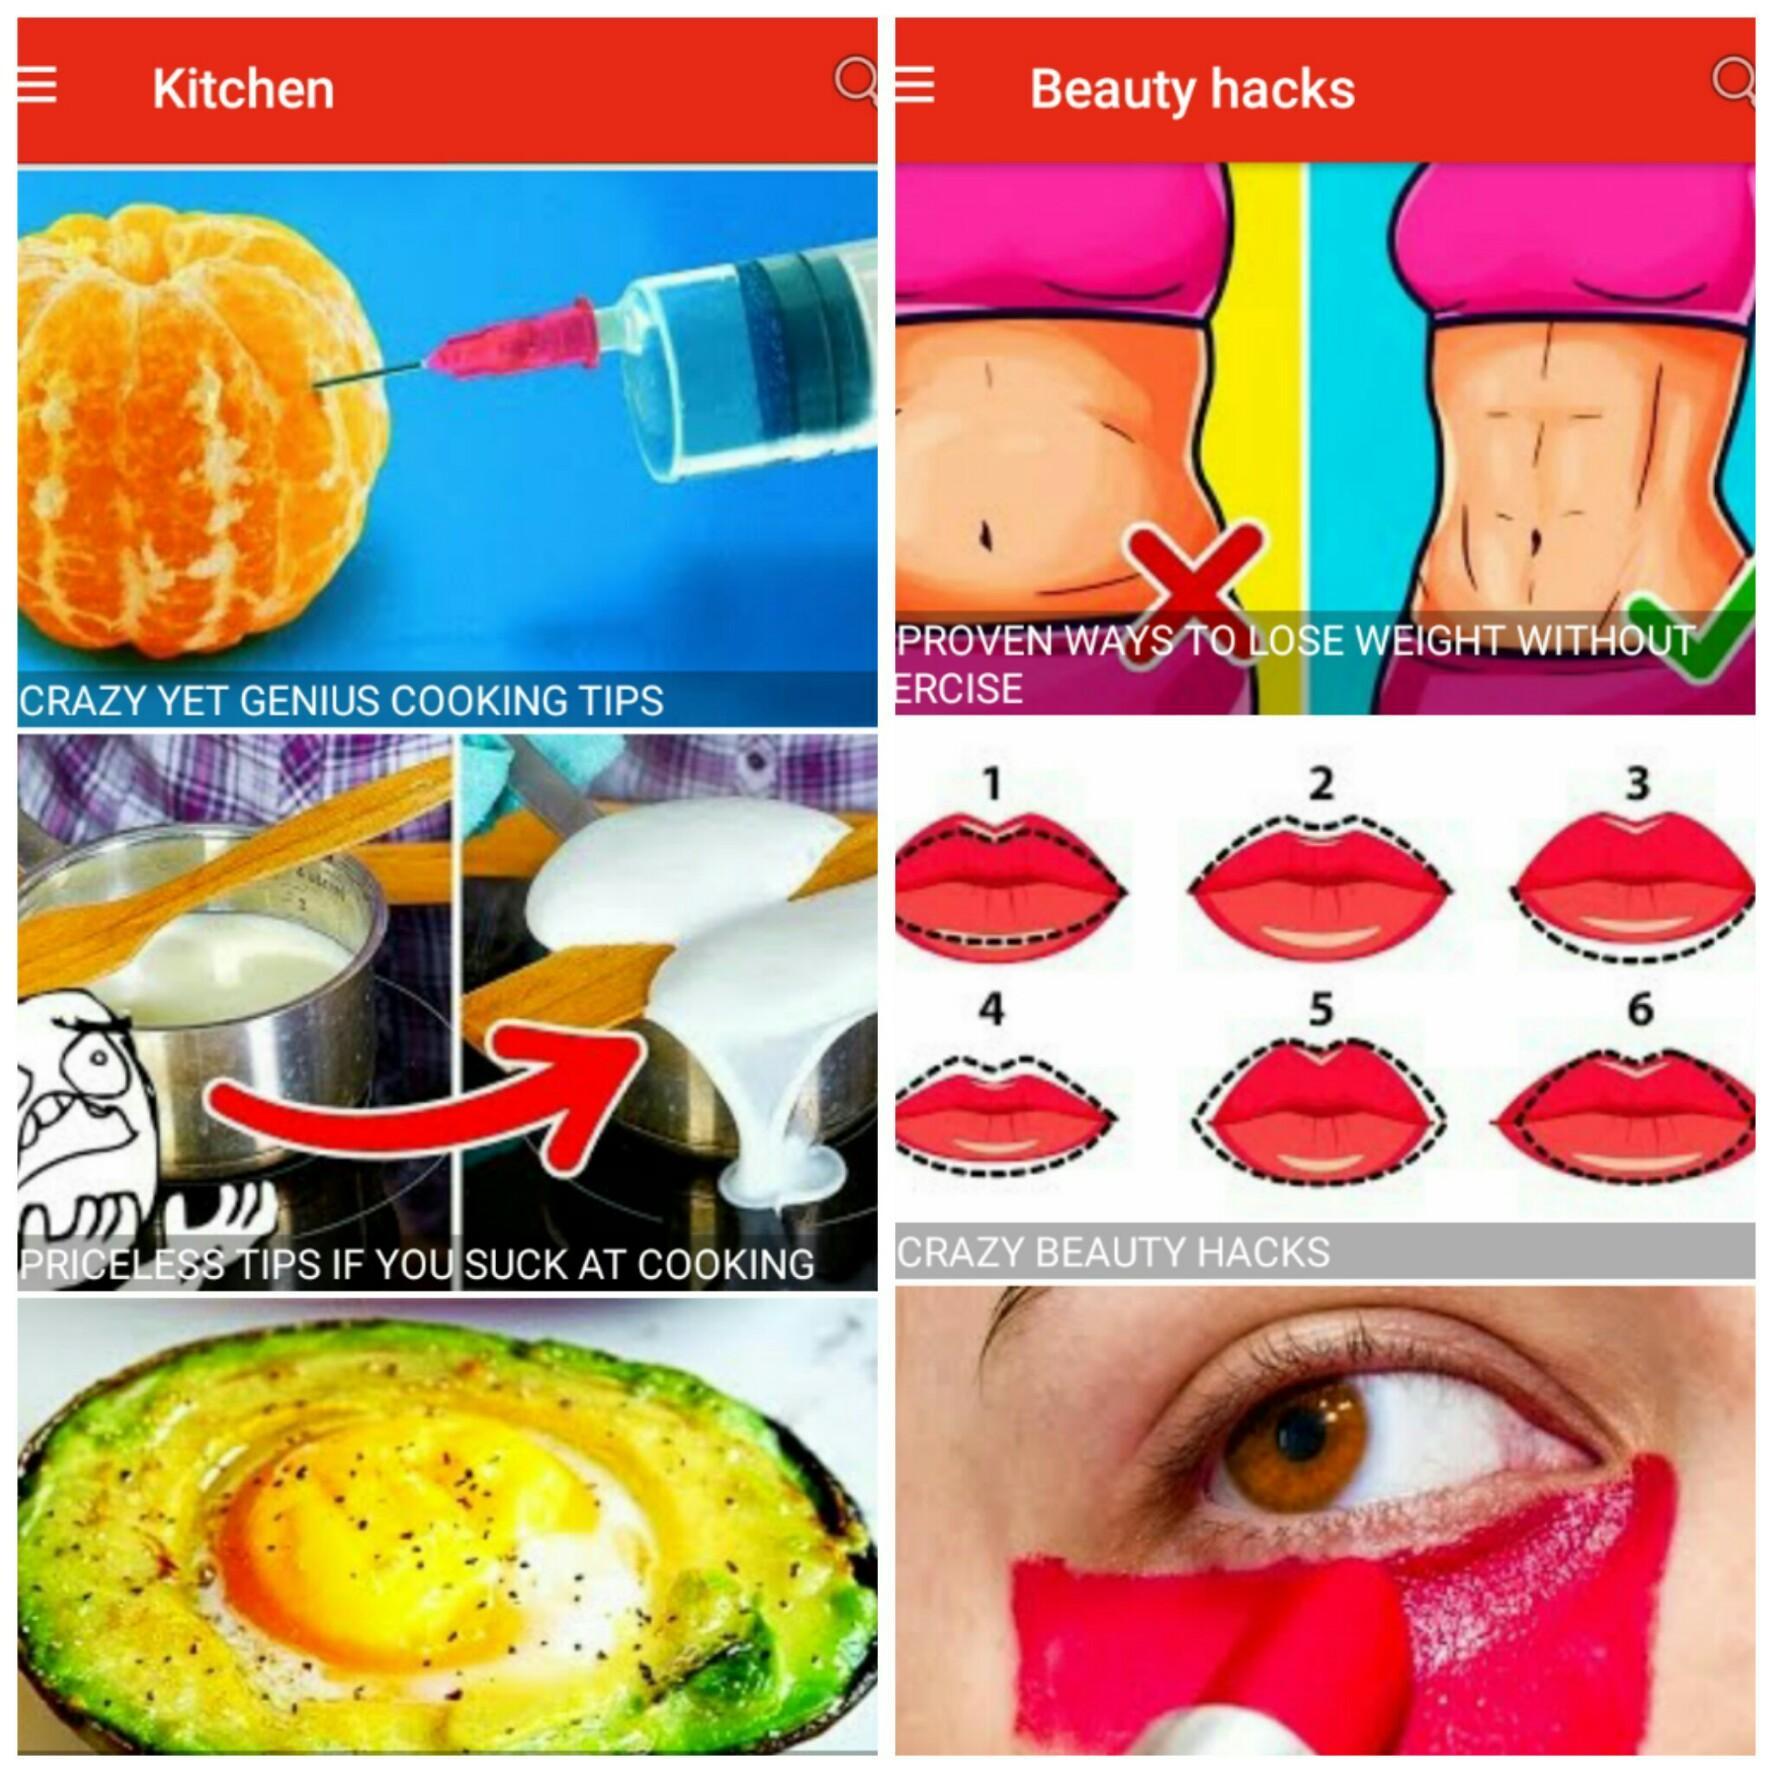 DIY 5 Minute Crafts for Android - APK Download